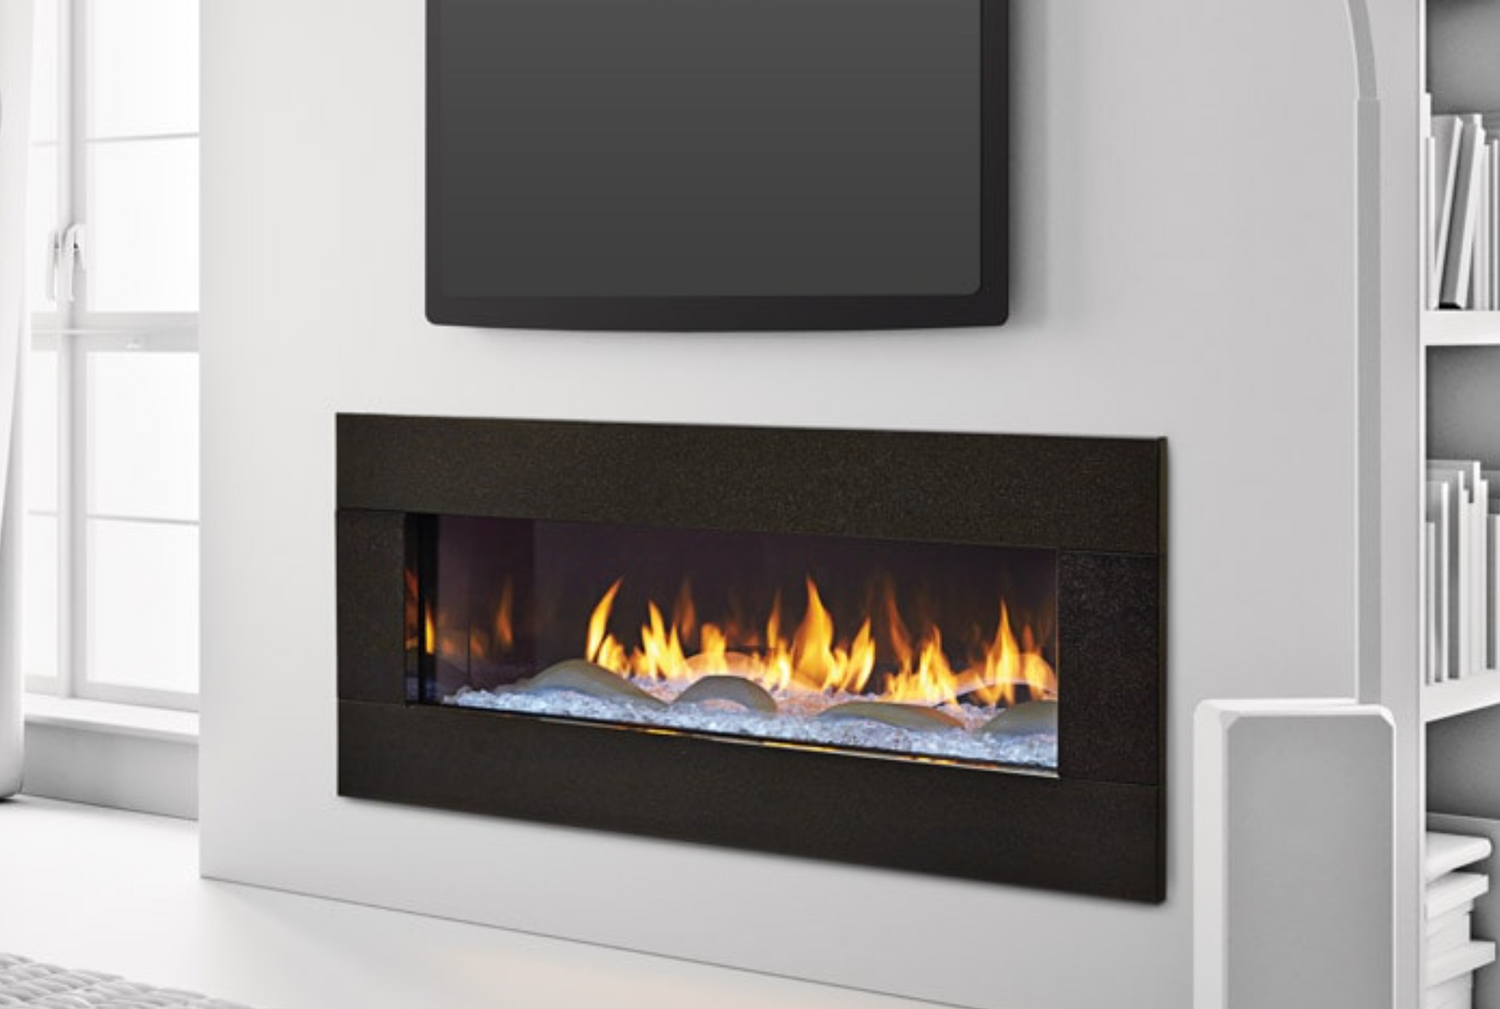 Fireplace in a white home placed below a TV